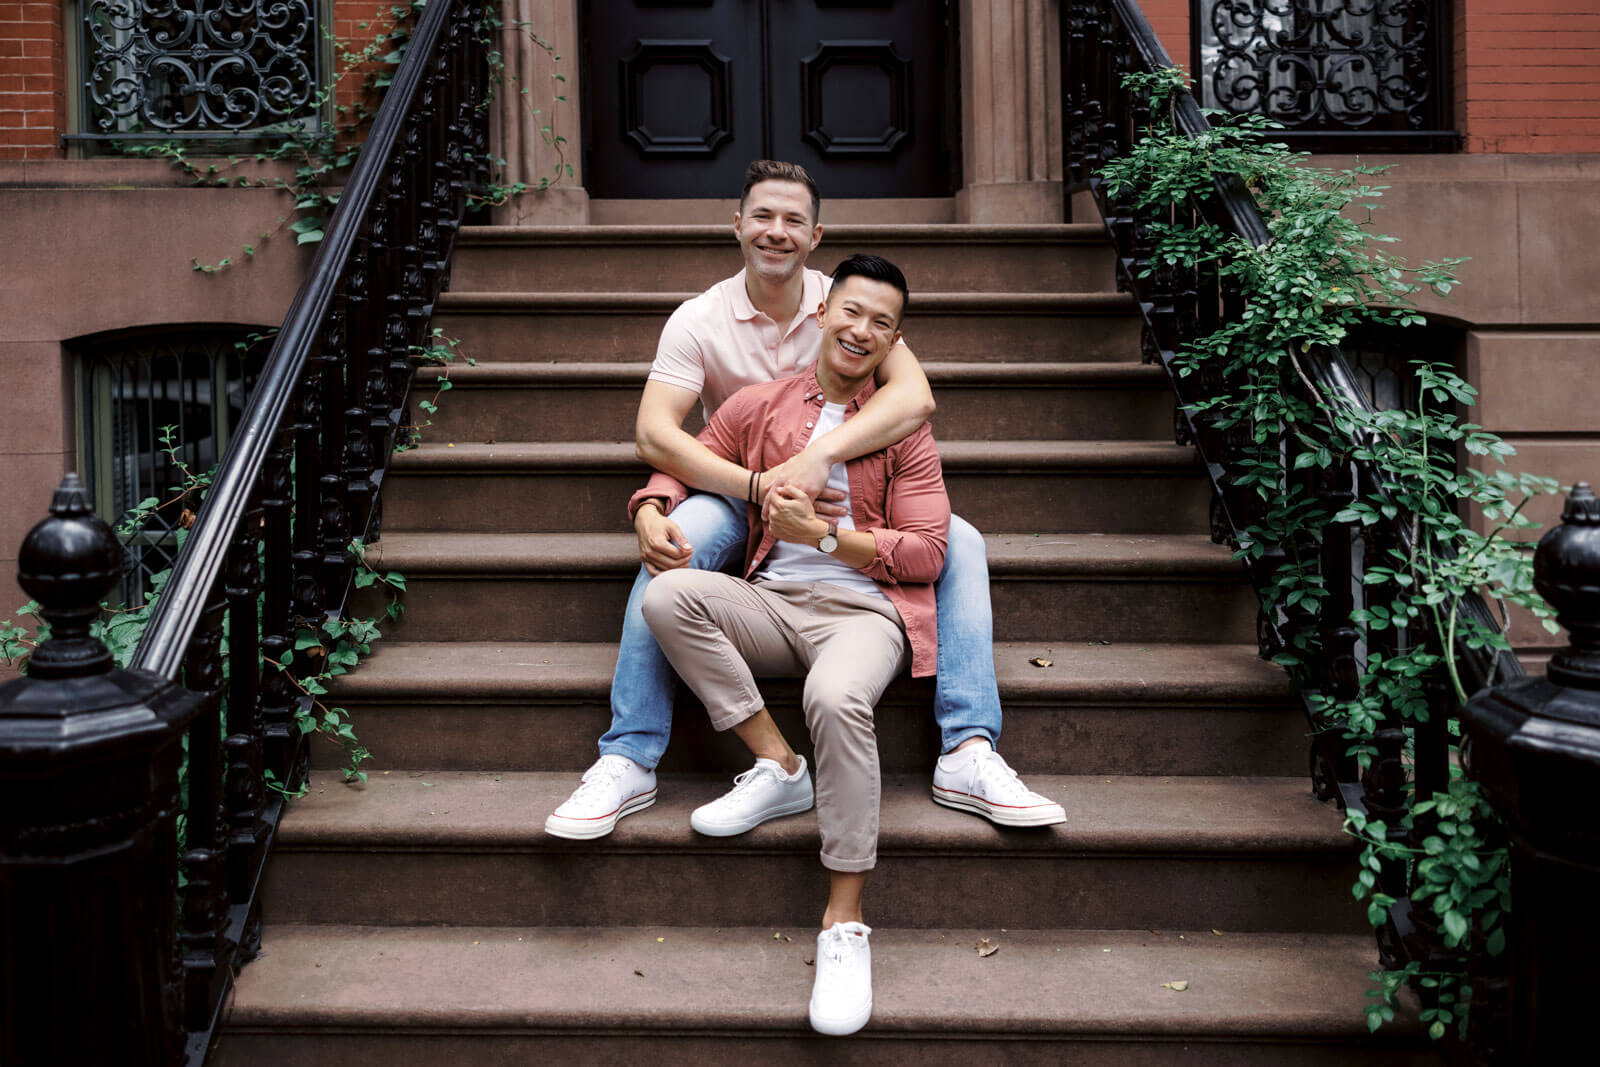 Engagement photos: The engaged couple is sitting on a staircase outside of a house at West Village Madison Square Park, NYC.